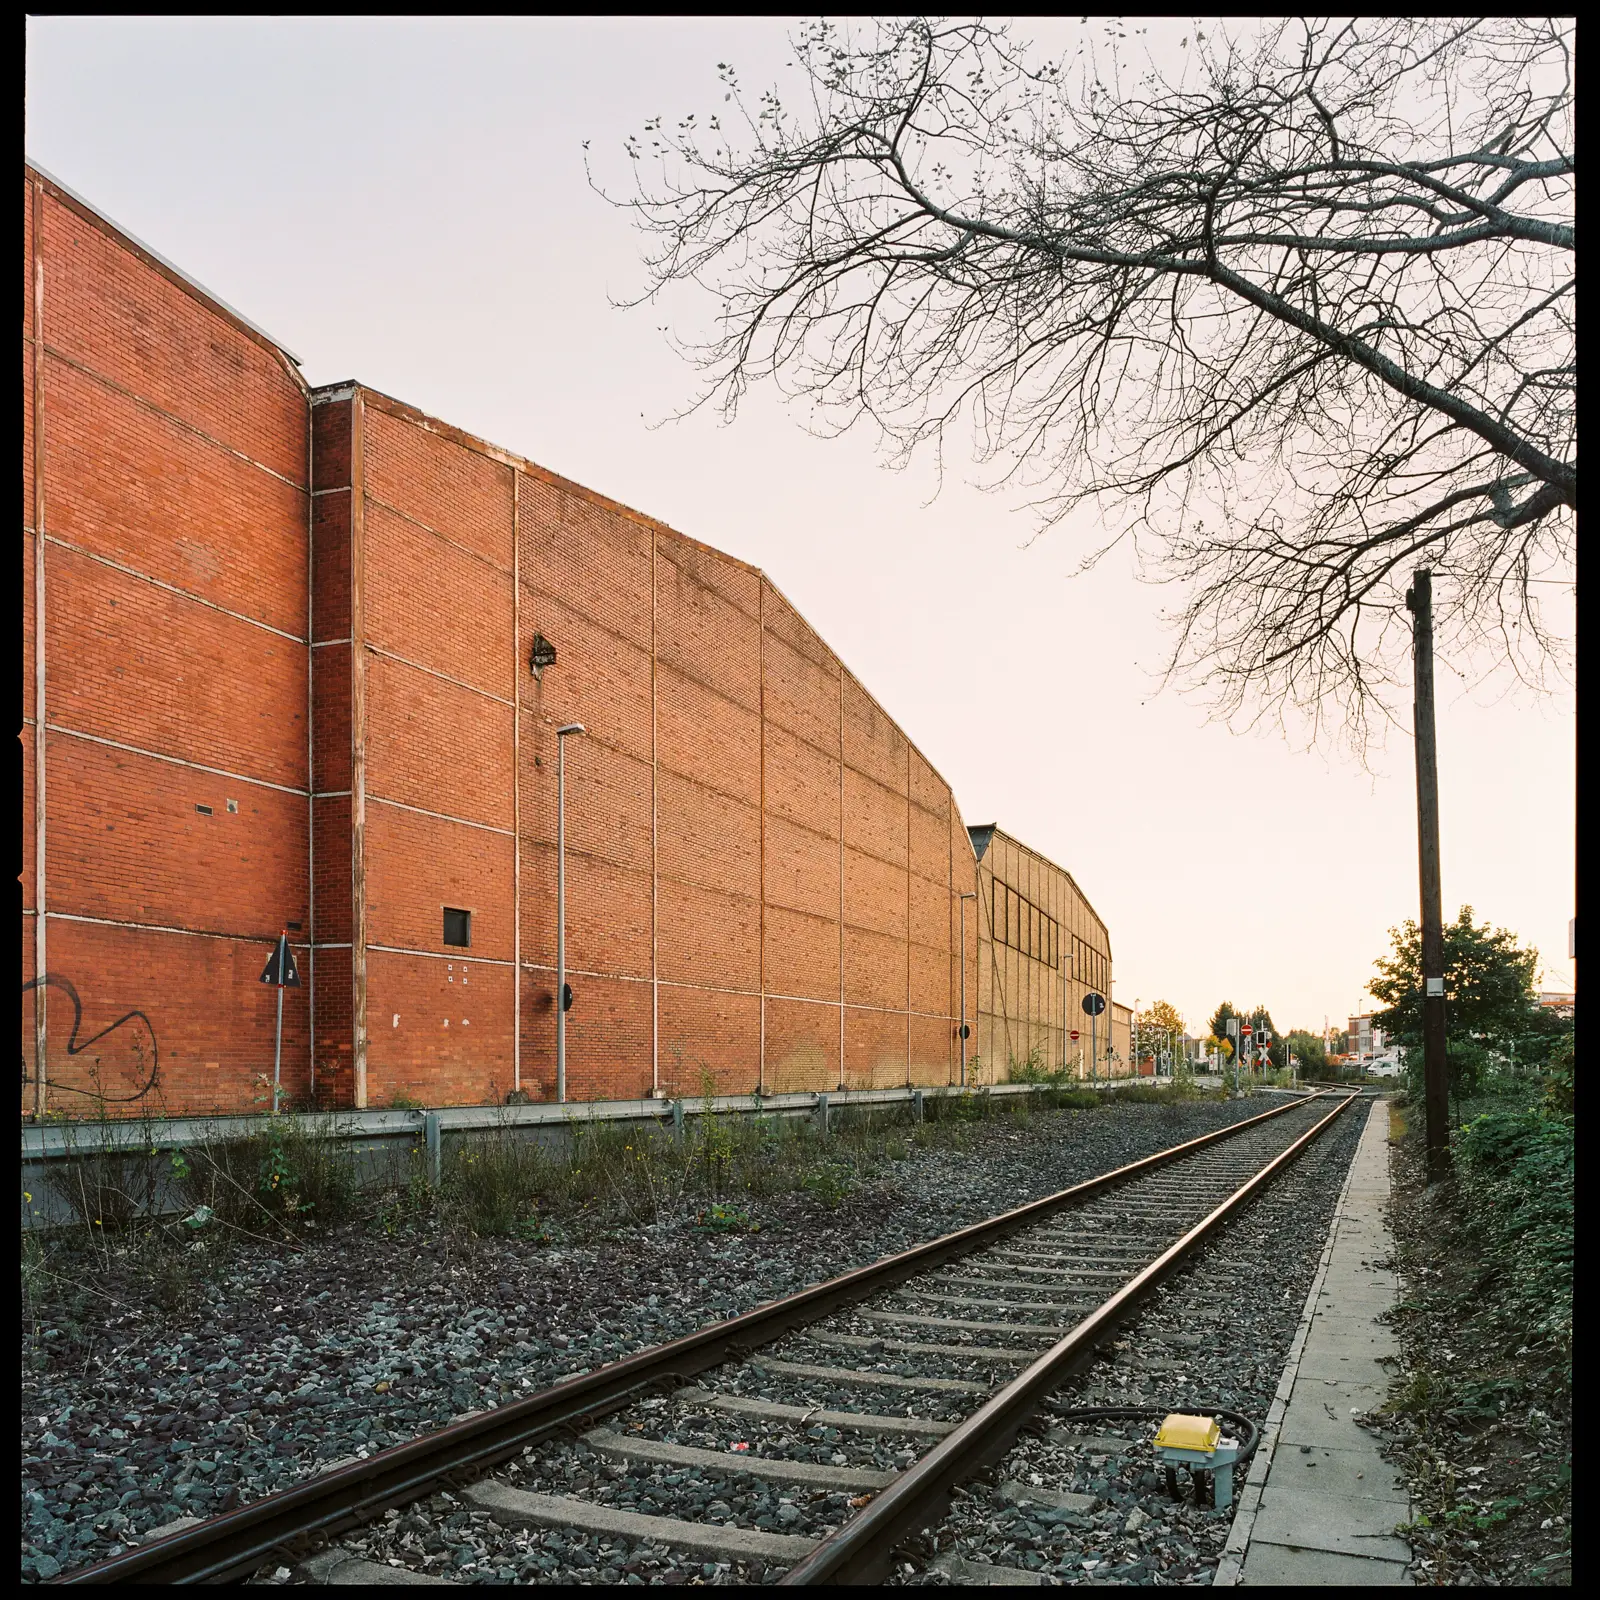 railroad tracks running along a large windowless factory building